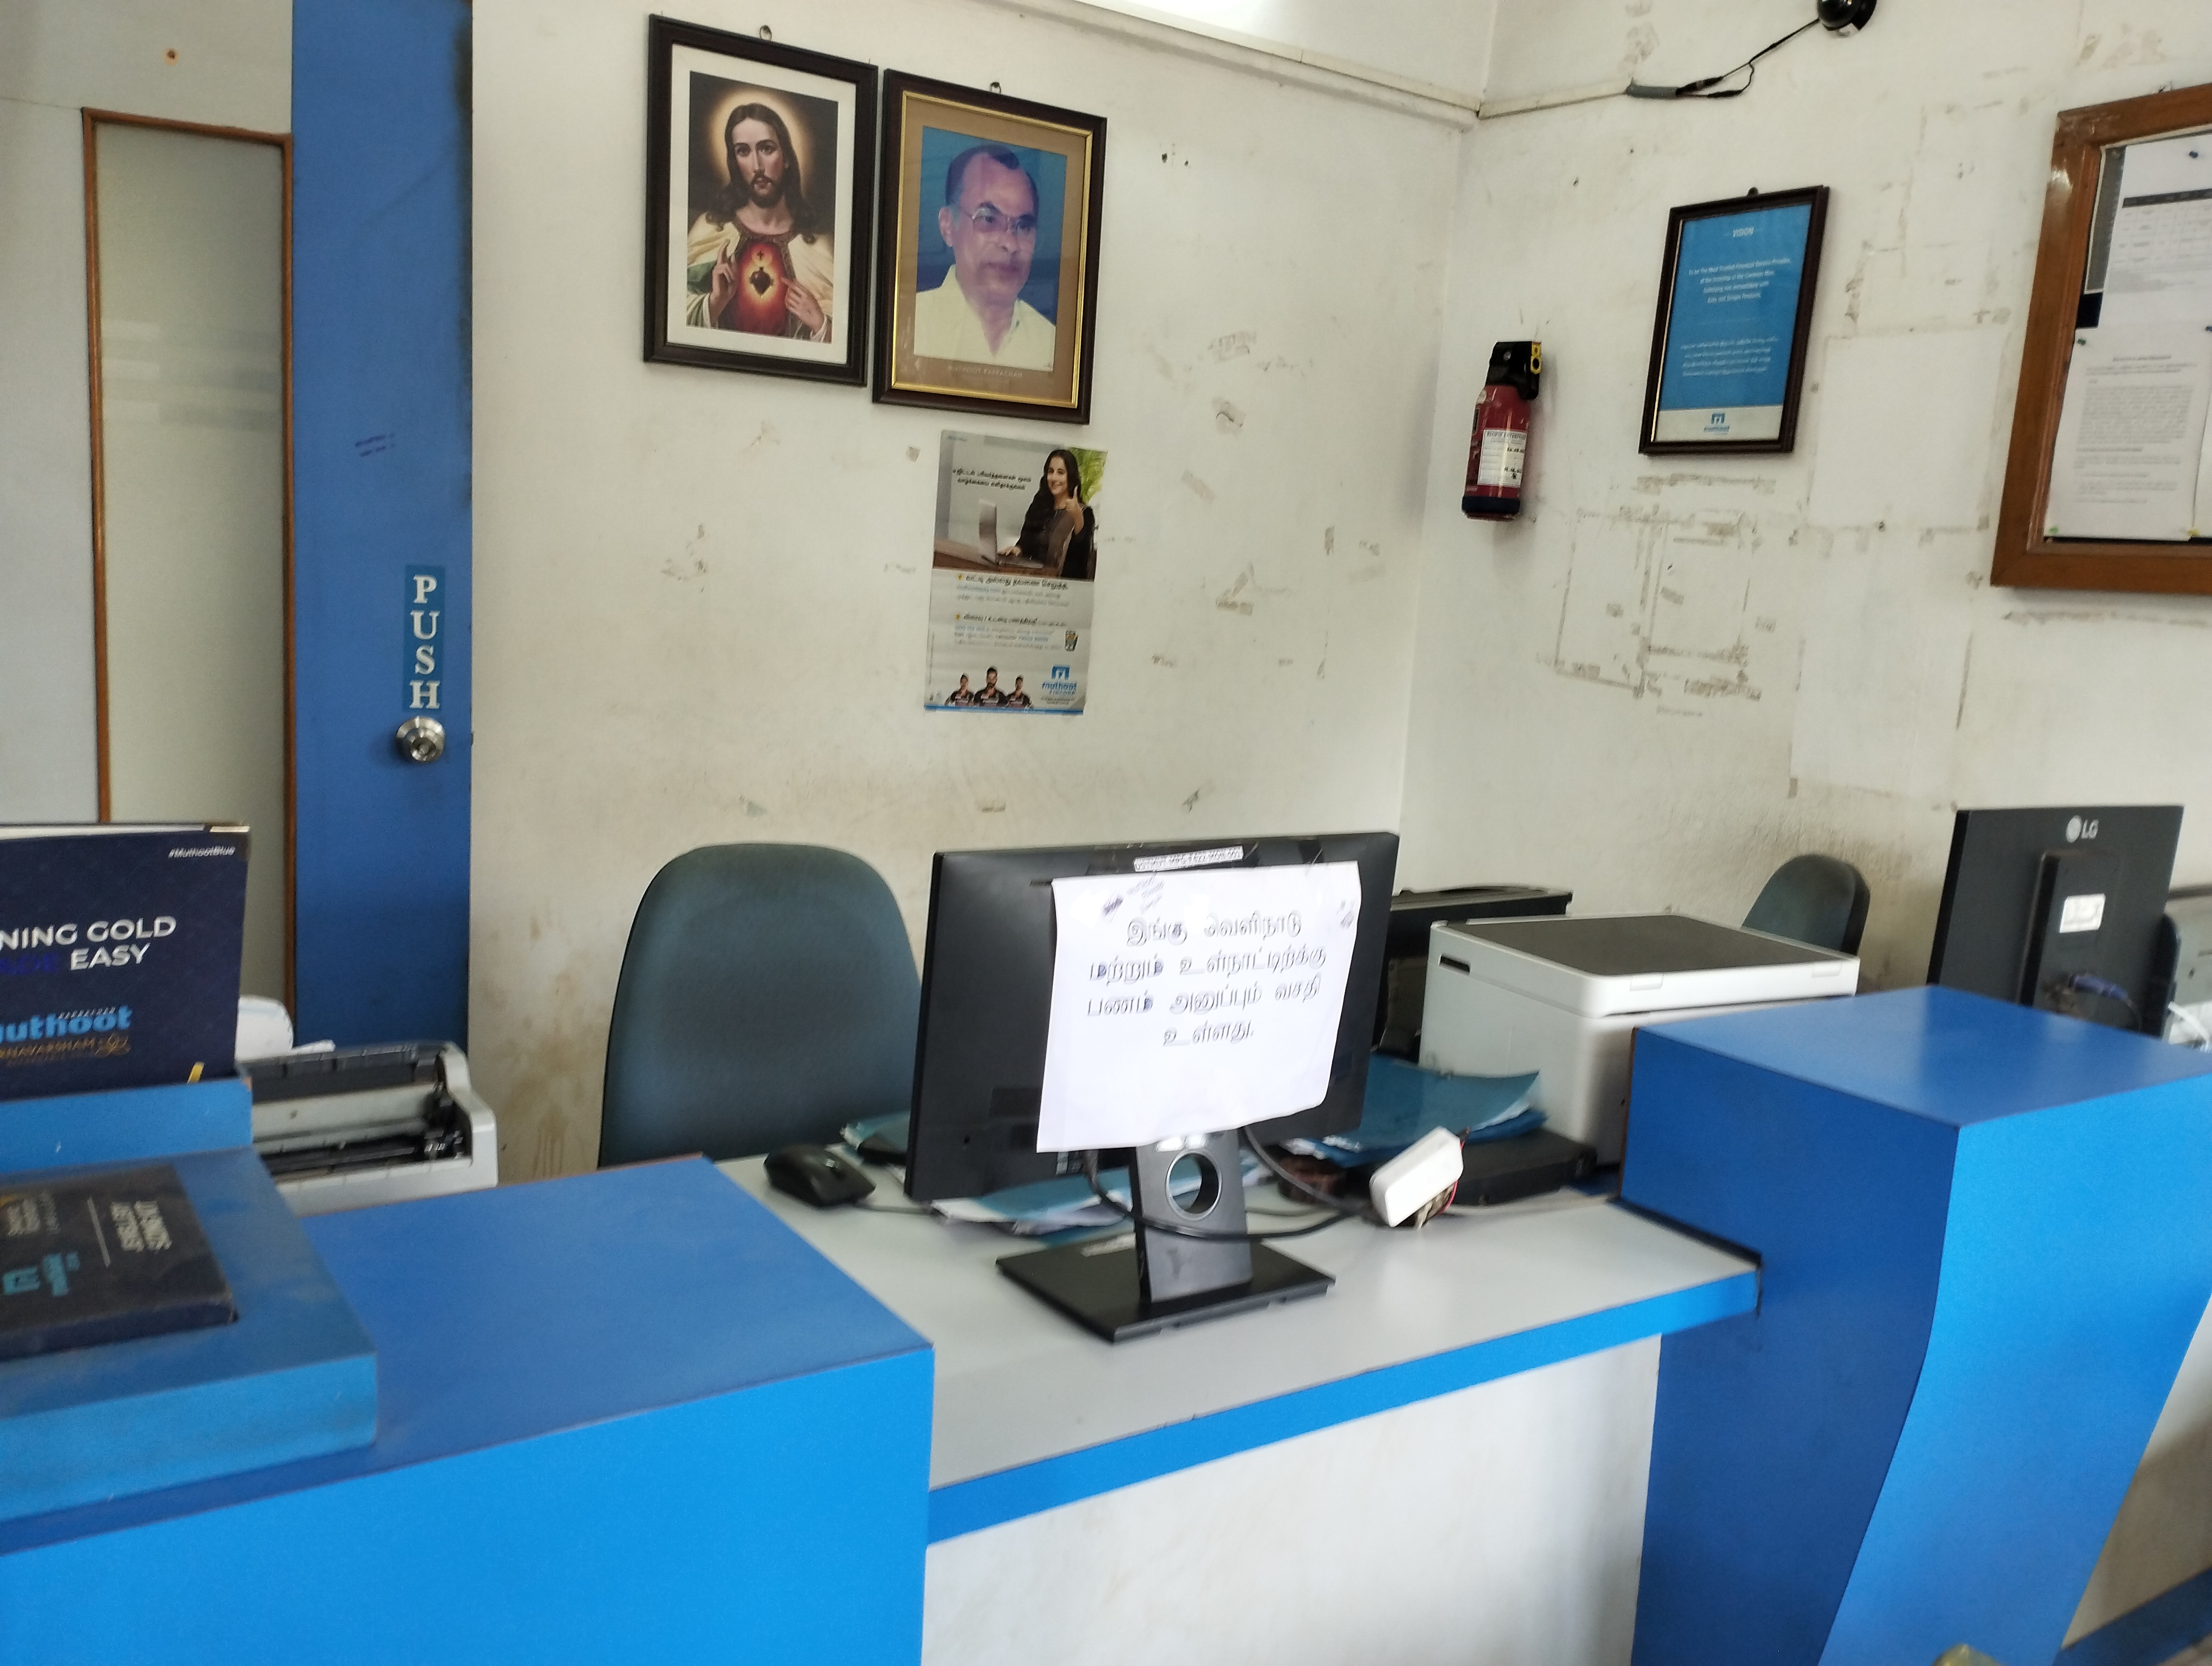 Photos and Videos of Muthoot Fincorp Gold Loan in Alangudi, Pudukkottai